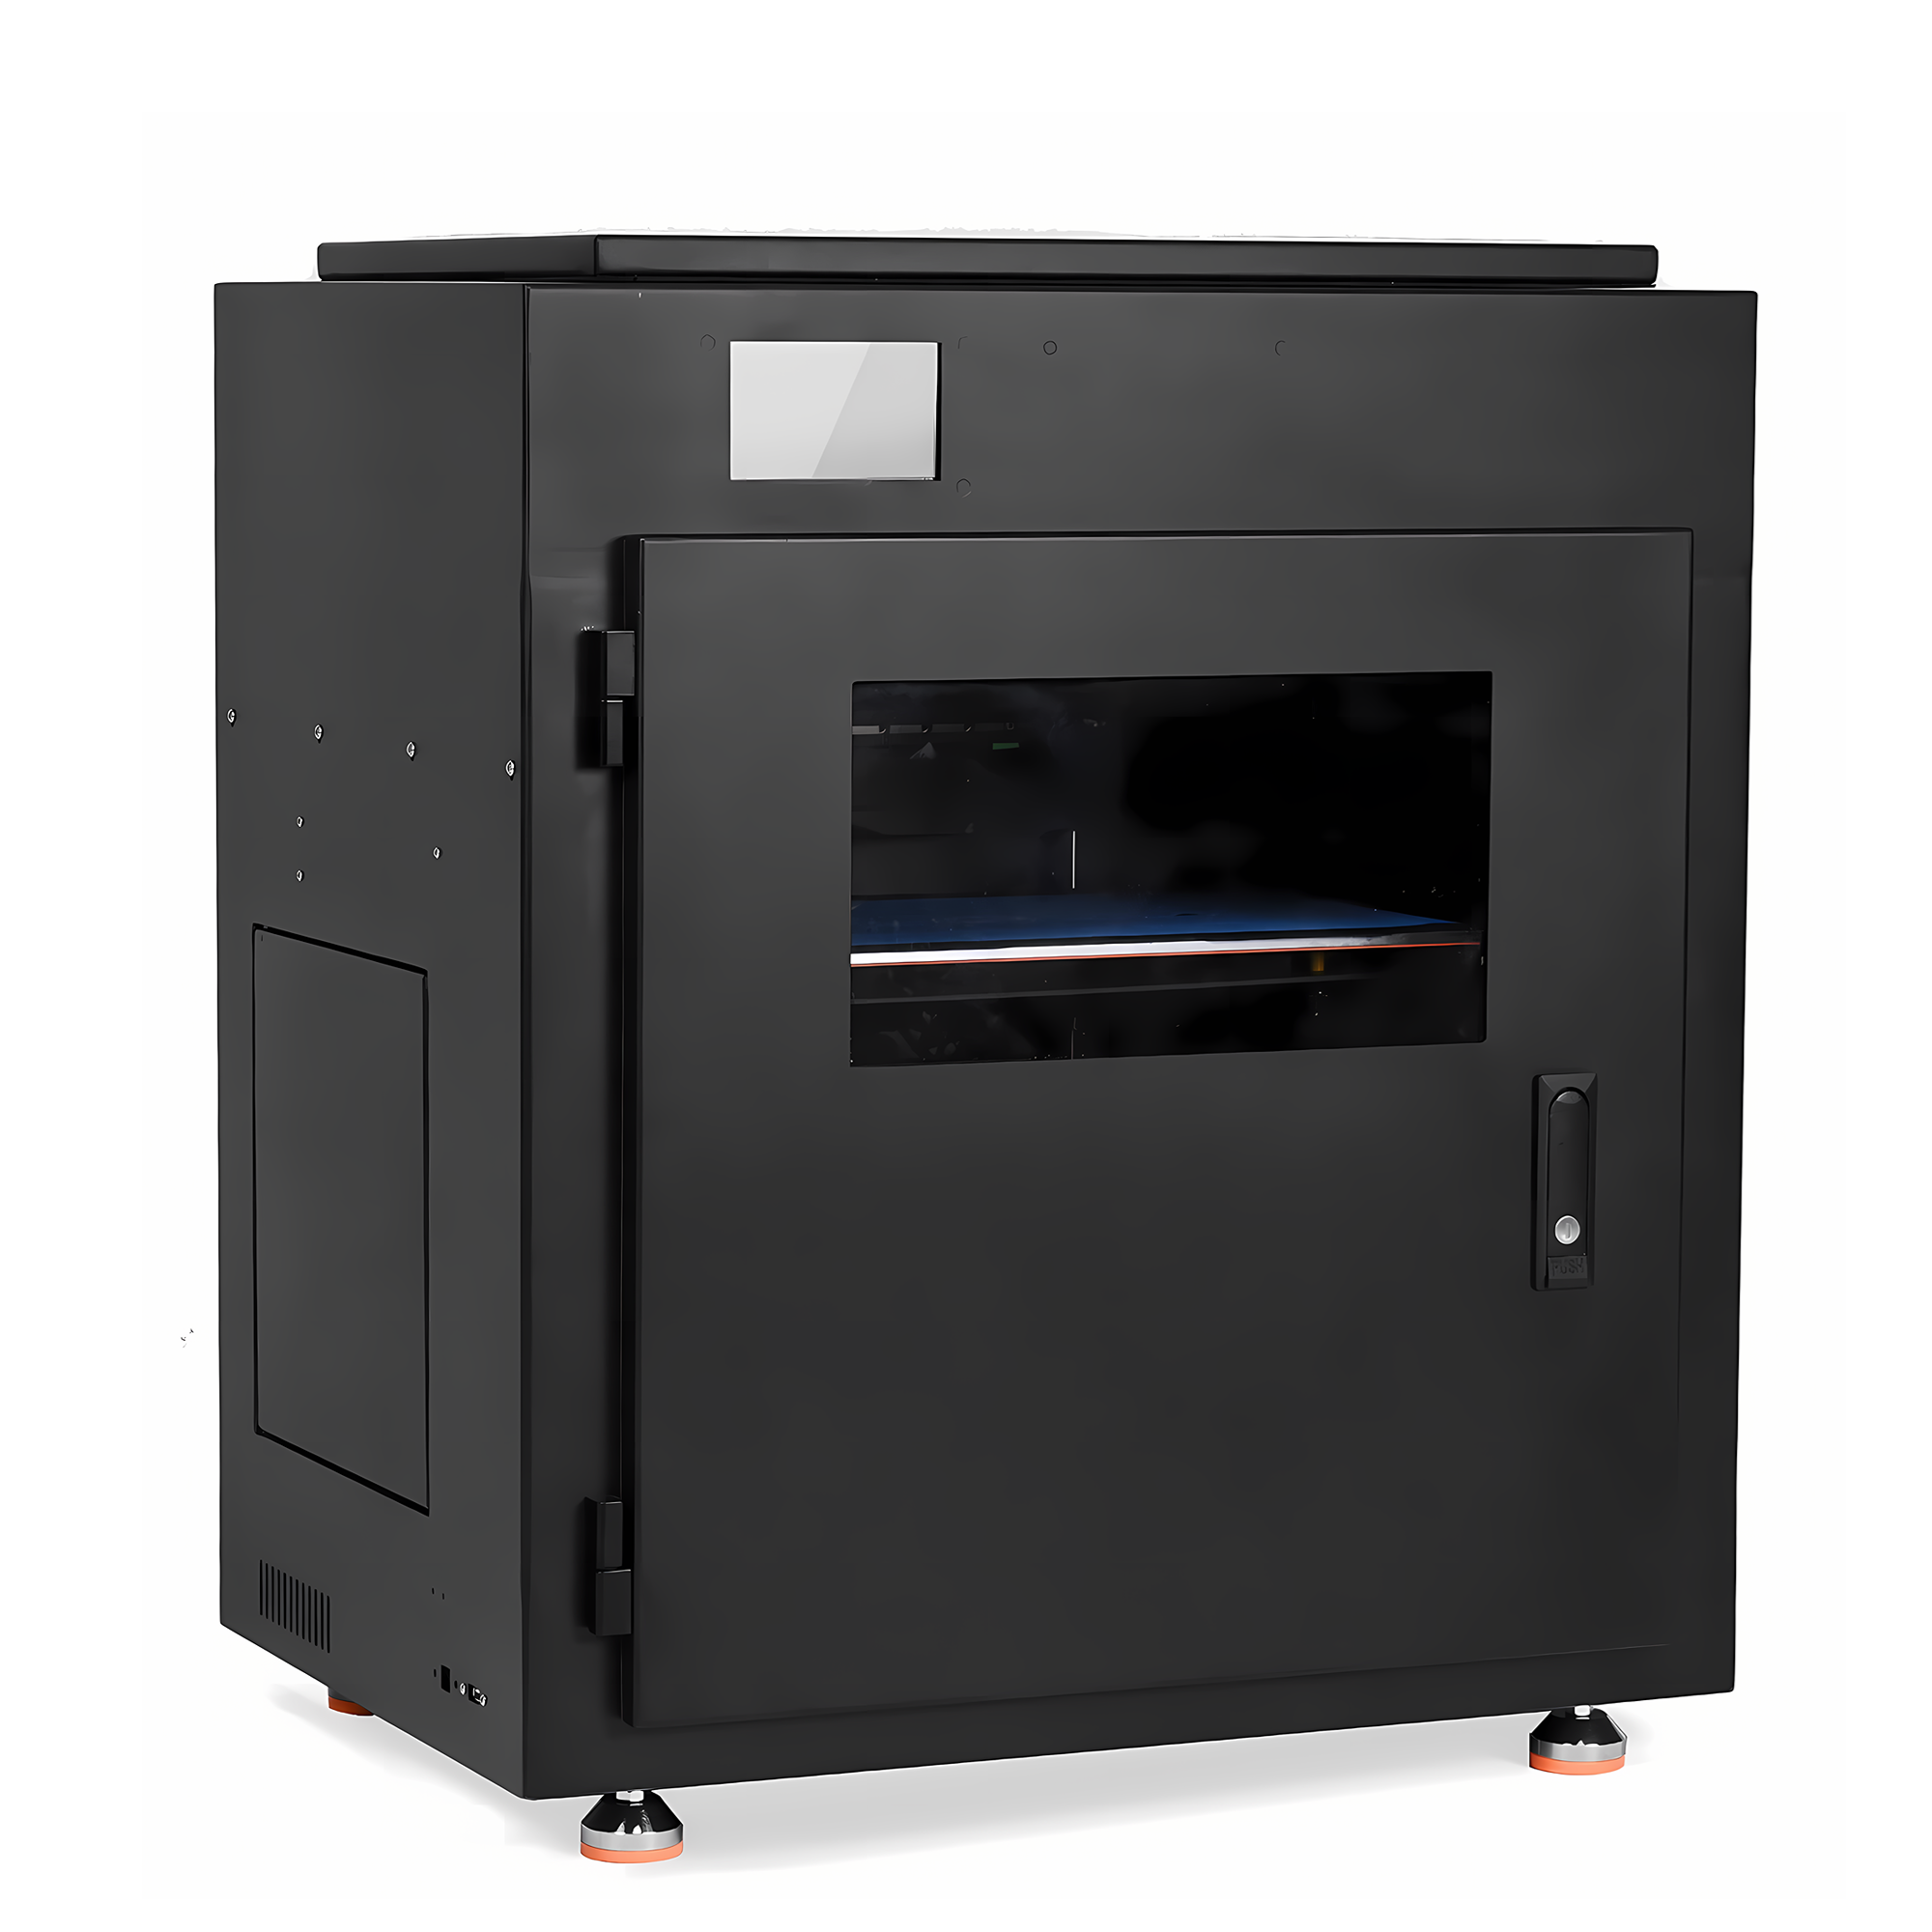 Innovating for Tomorrow: Exploring the Potential of 3D Printer Machines